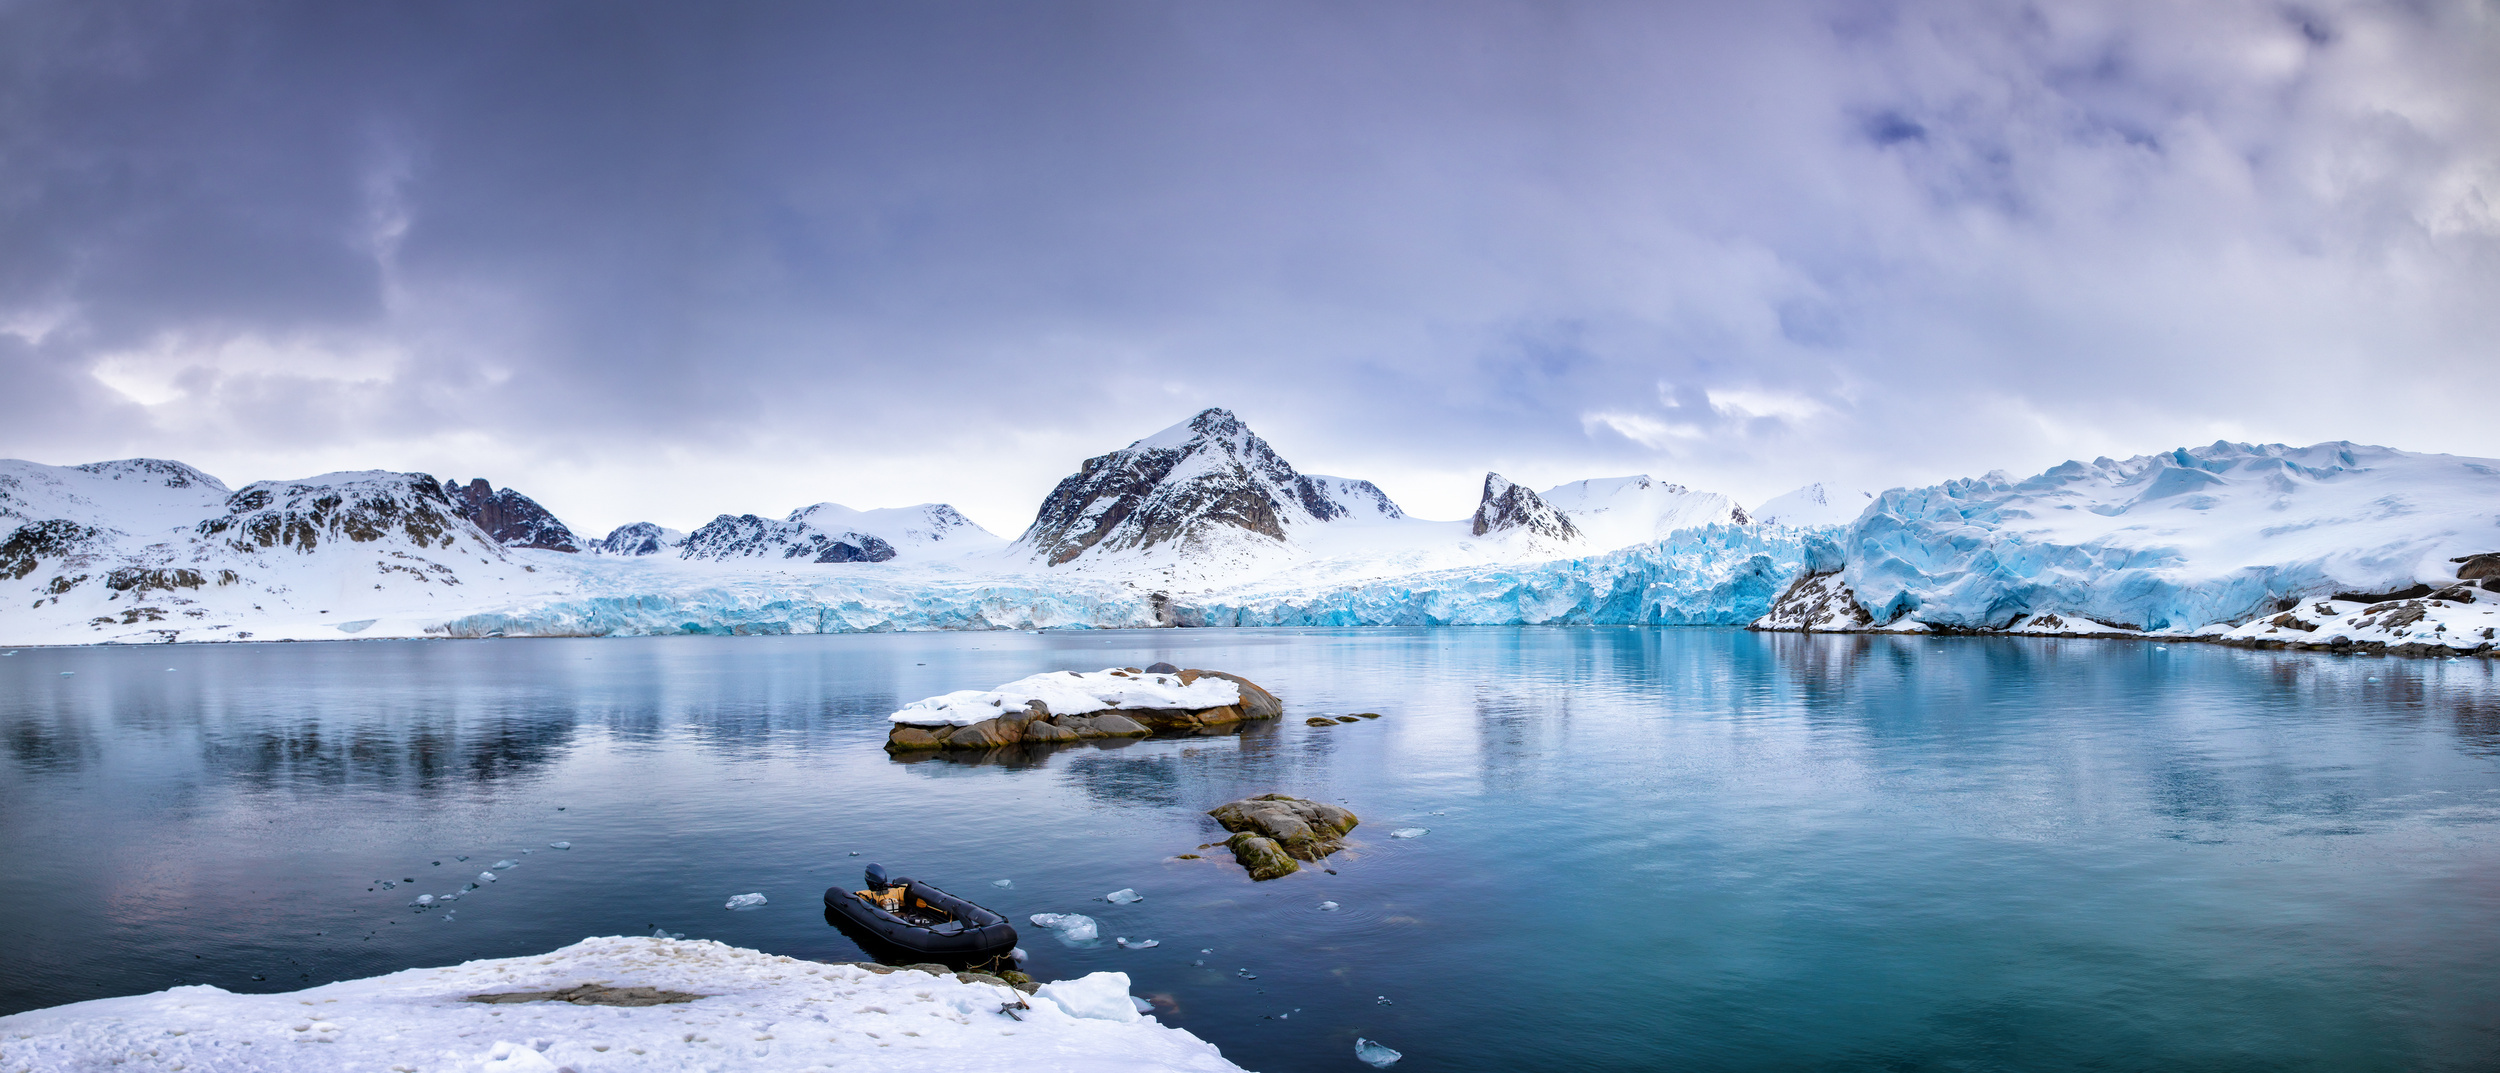 <p>Svalbard is a small island in the Arctic Circle with very few citizens and is always cold. But if you love Northern Lights sightings and polar days and nights, it’s a unique experience that’s sure to wow you. </p><p>You may also like: <a href='https://www.yardbarker.com/lifestyle/articles/an_essential_guide_to_buying_secondhand_items_online/s1__38937128'>An essential guide to buying secondhand items online</a></p>